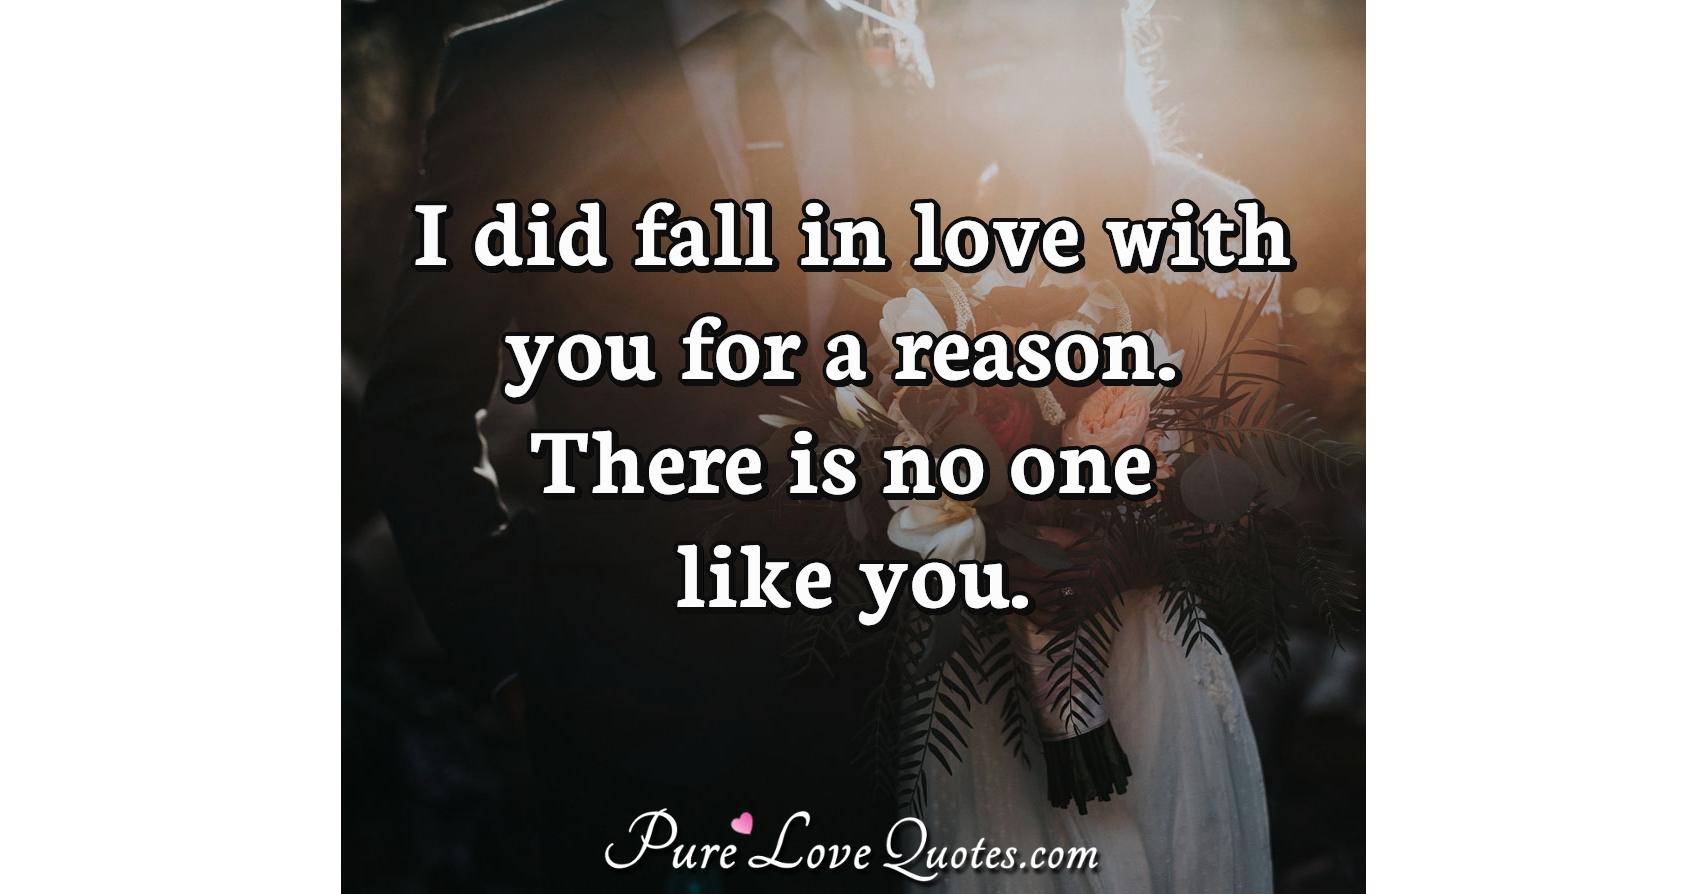 I did fall in love with you for a reason. There is no one like you